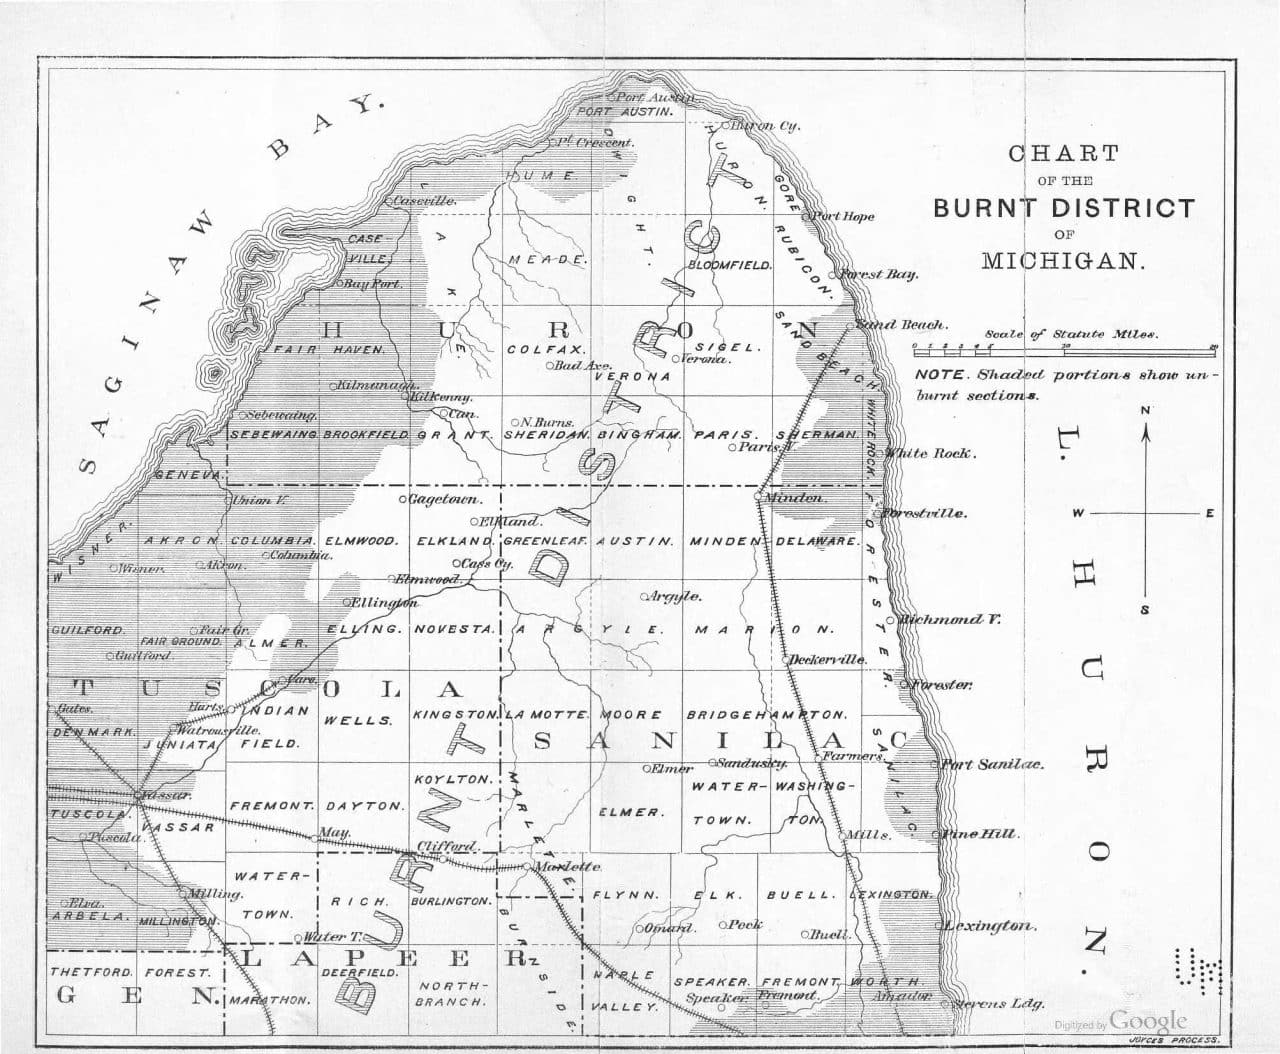 Local Accounts of the Great Michigan Fire of 1881